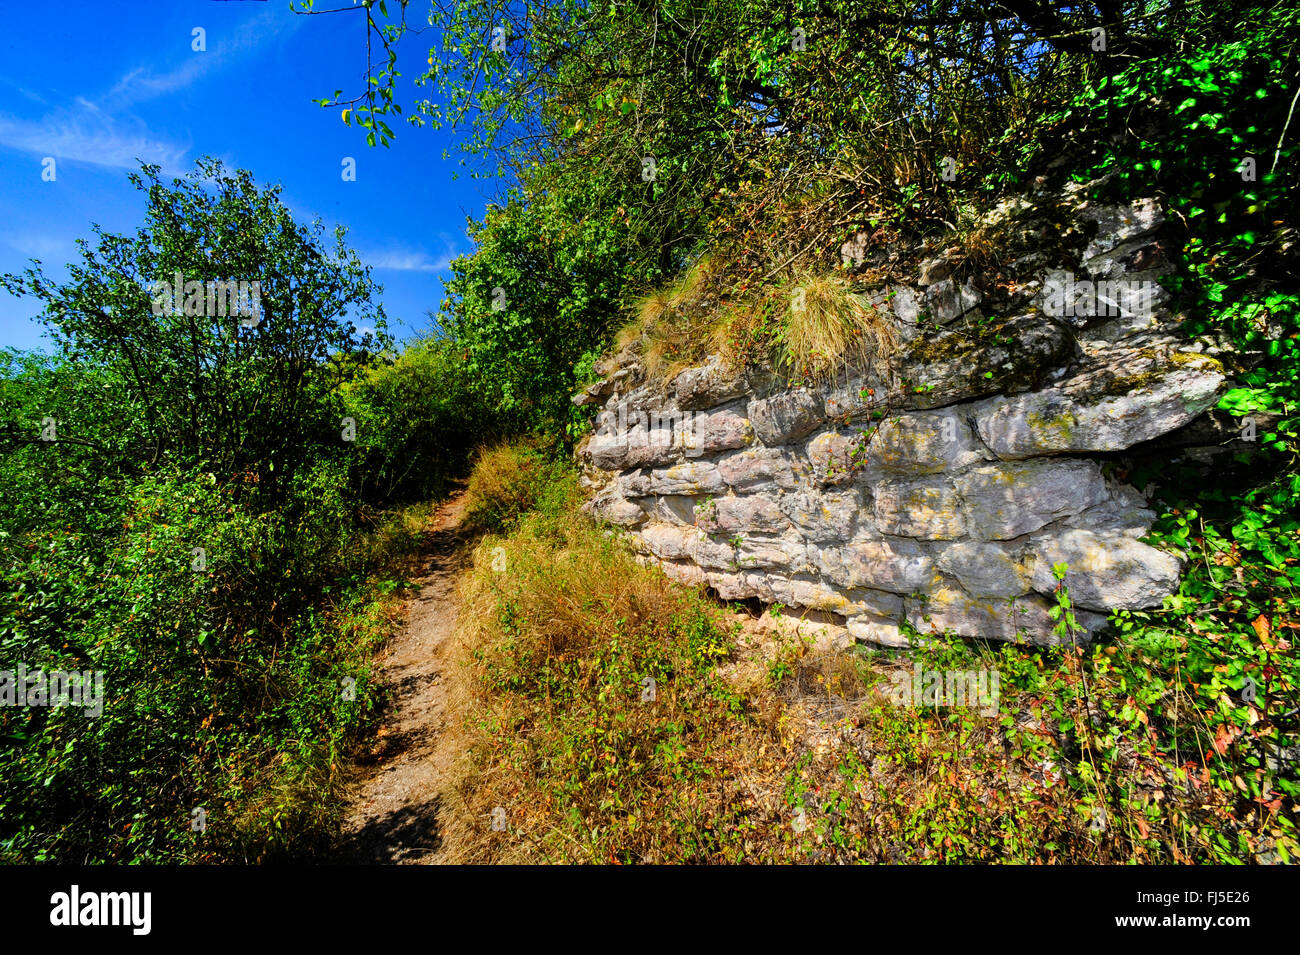 natural stone wall in the Nahe valley, habitat for reptiles, Germany, Rhineland-Palatinate, Bad Kreuznach Stock Photo